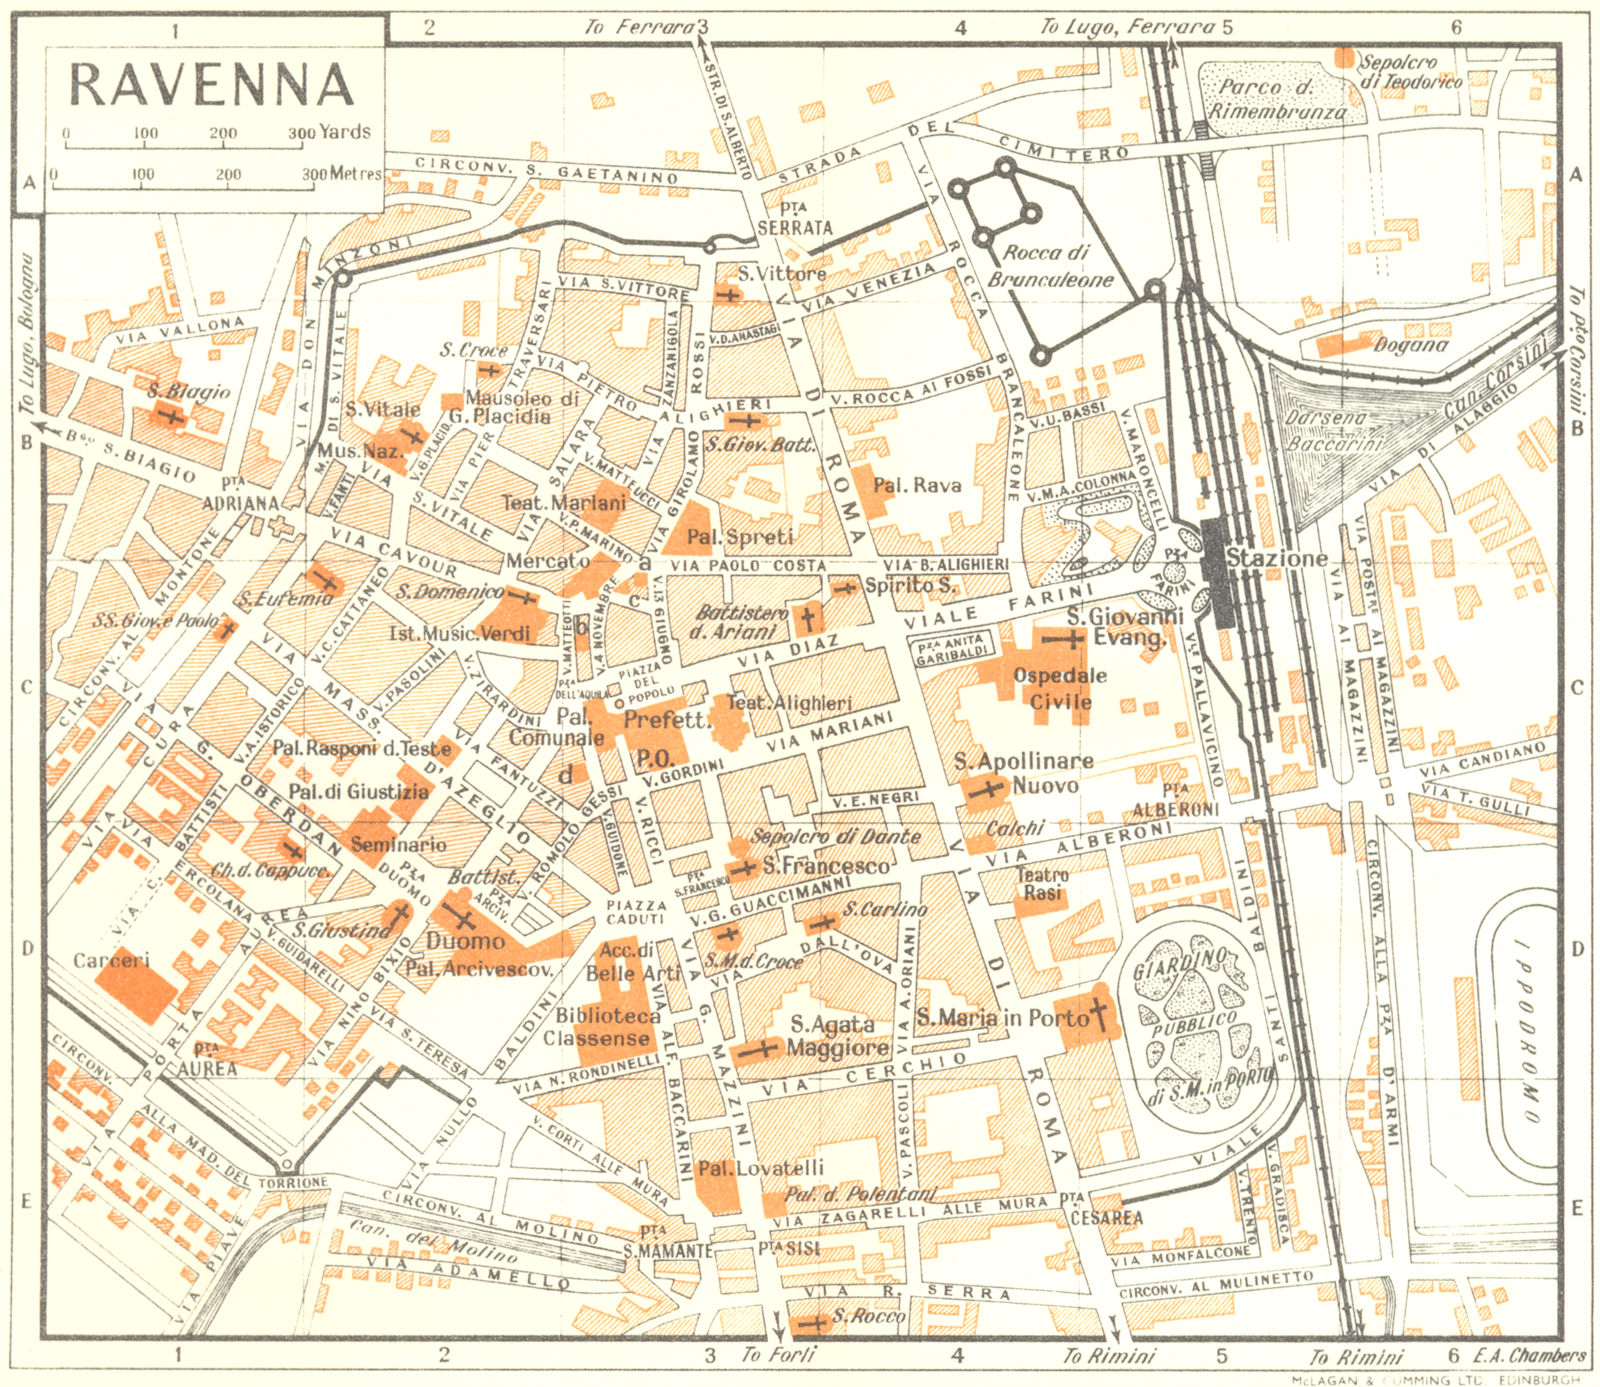 Associate Product RAVENNA town/city plan. Italy 1953 old vintage map chart